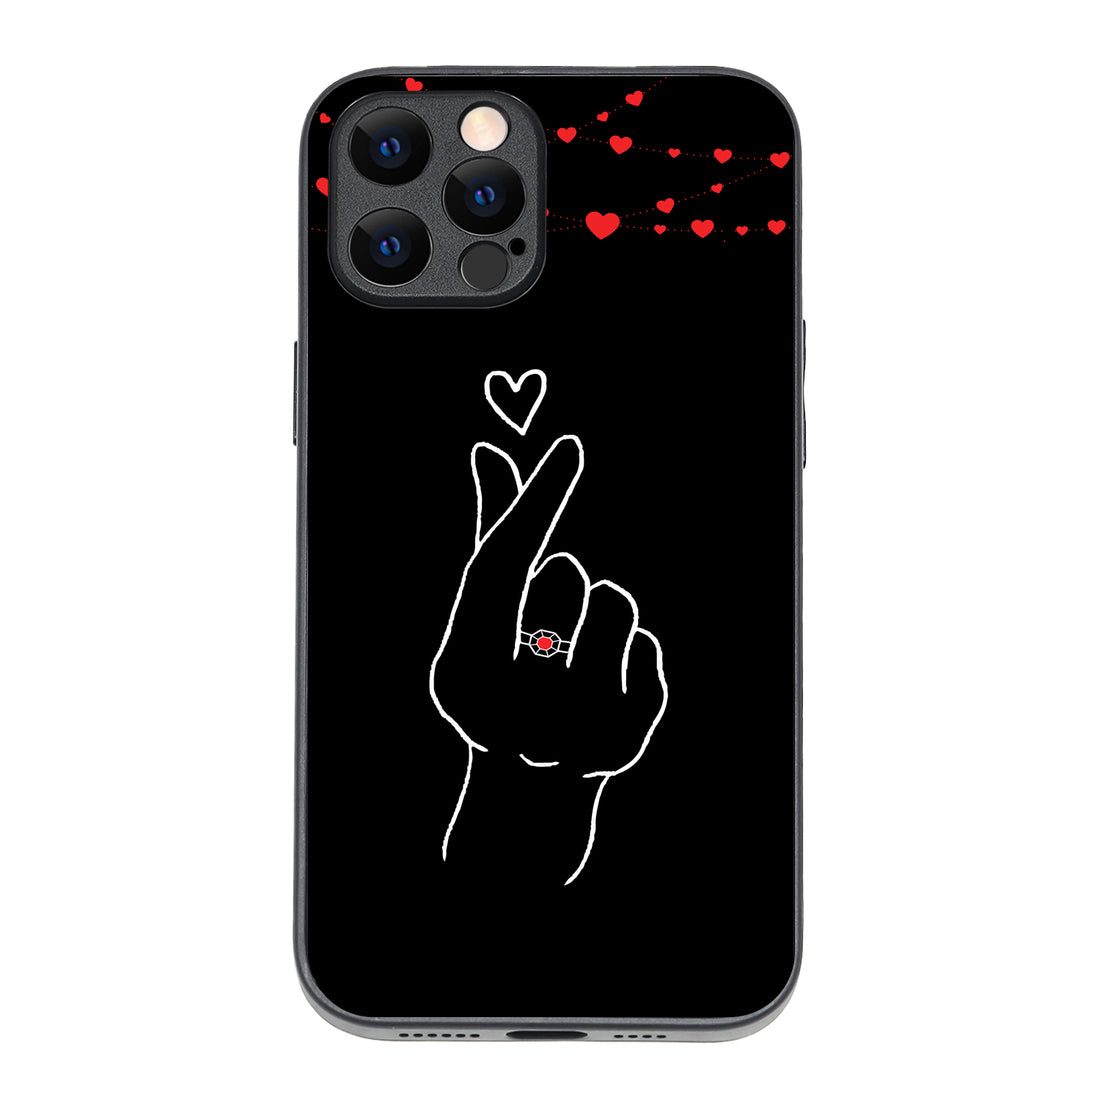 Click Heart Girl Couple iPhone 12 Pro Max Case